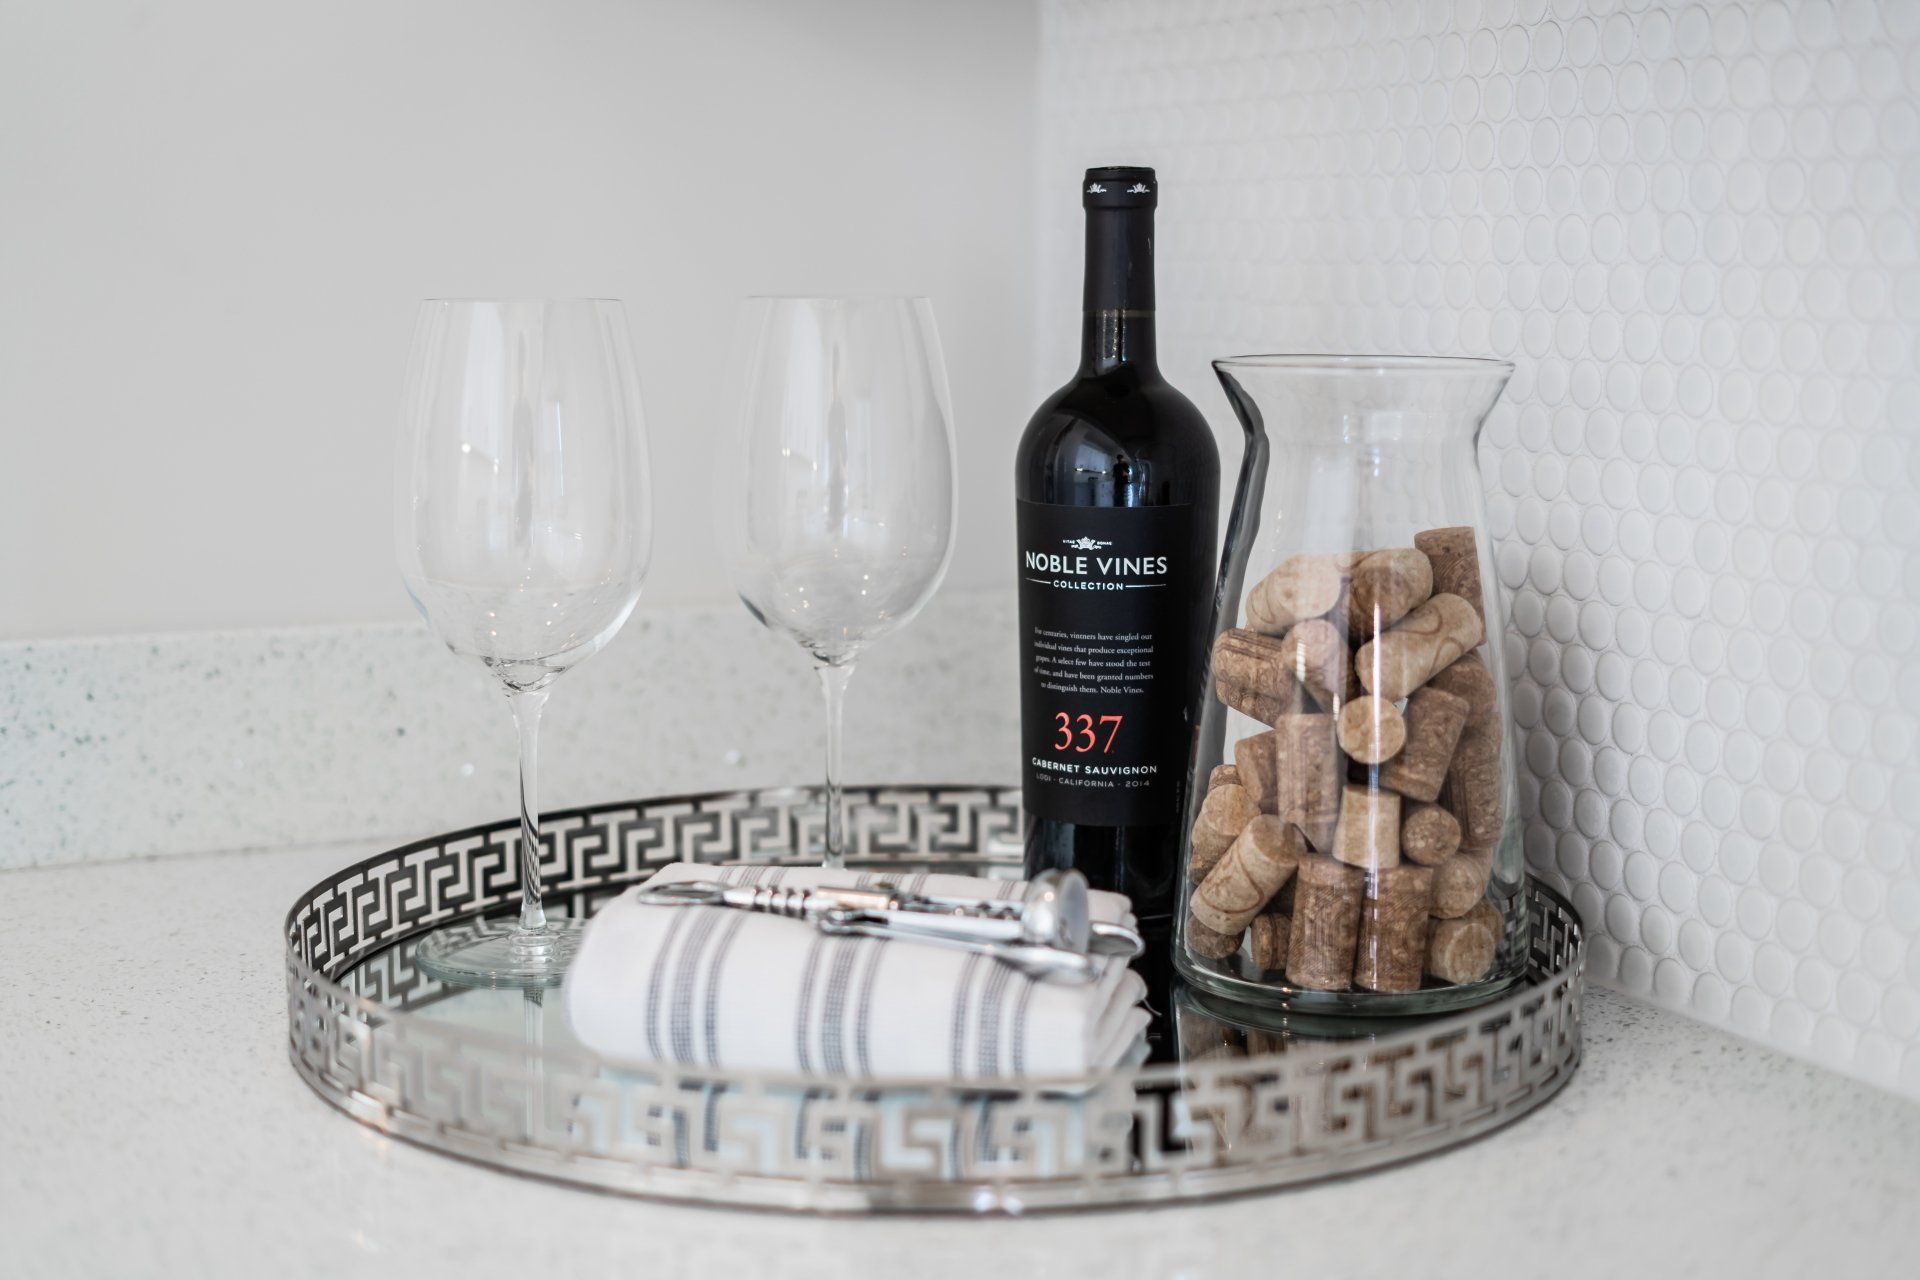 Product Shot of Wine and glasses on a white kitchen countertop, Chattanooga Product Photographer